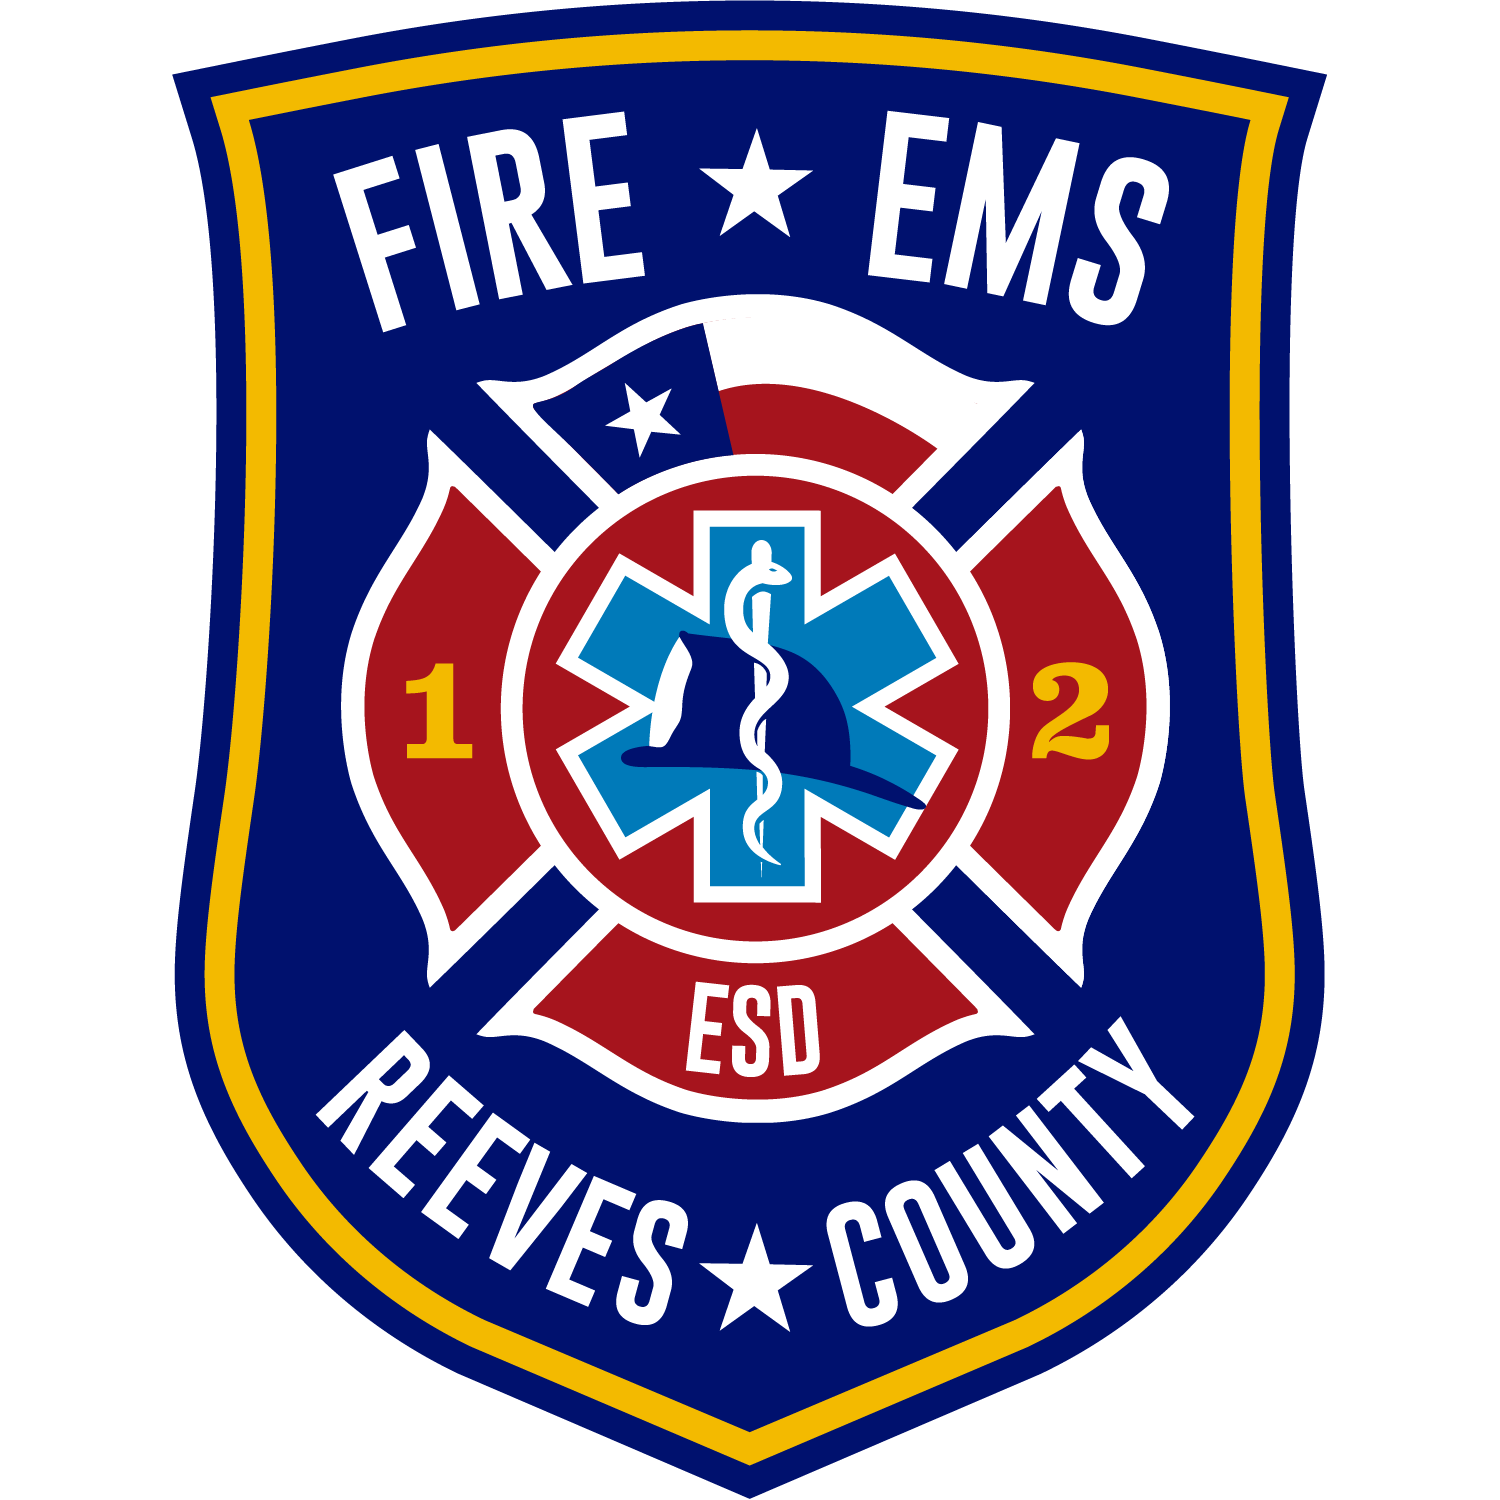 Reeves Co. ESD 1&2